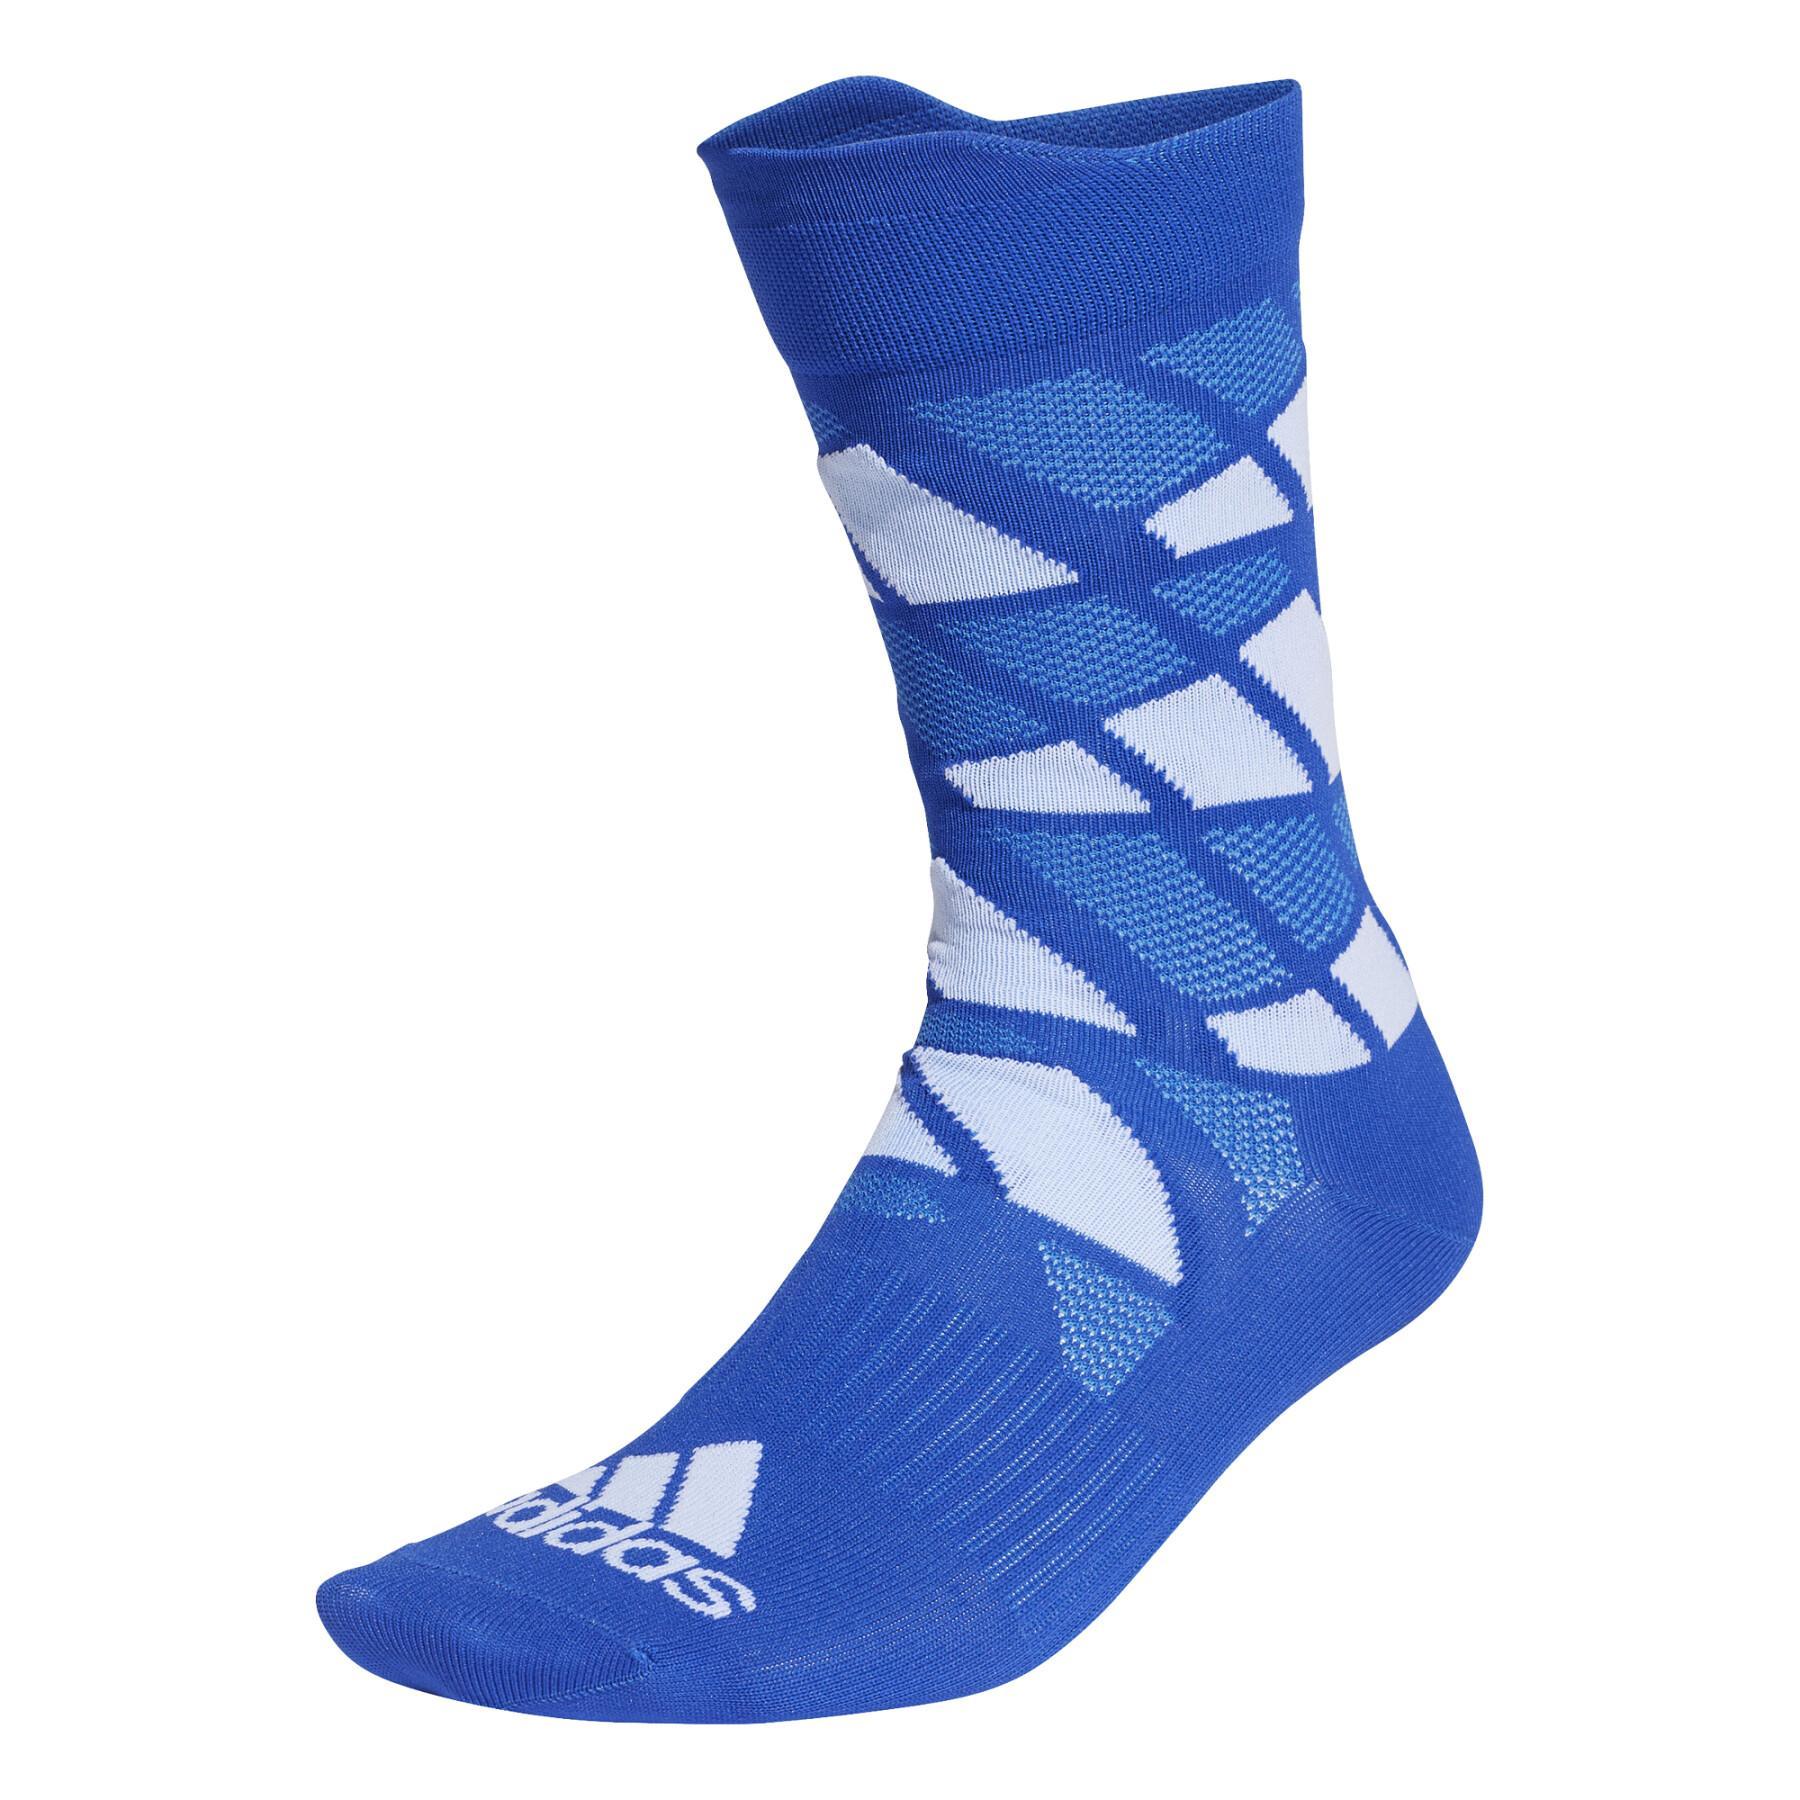 Meias adidas Ultralight Allover Graphic performance